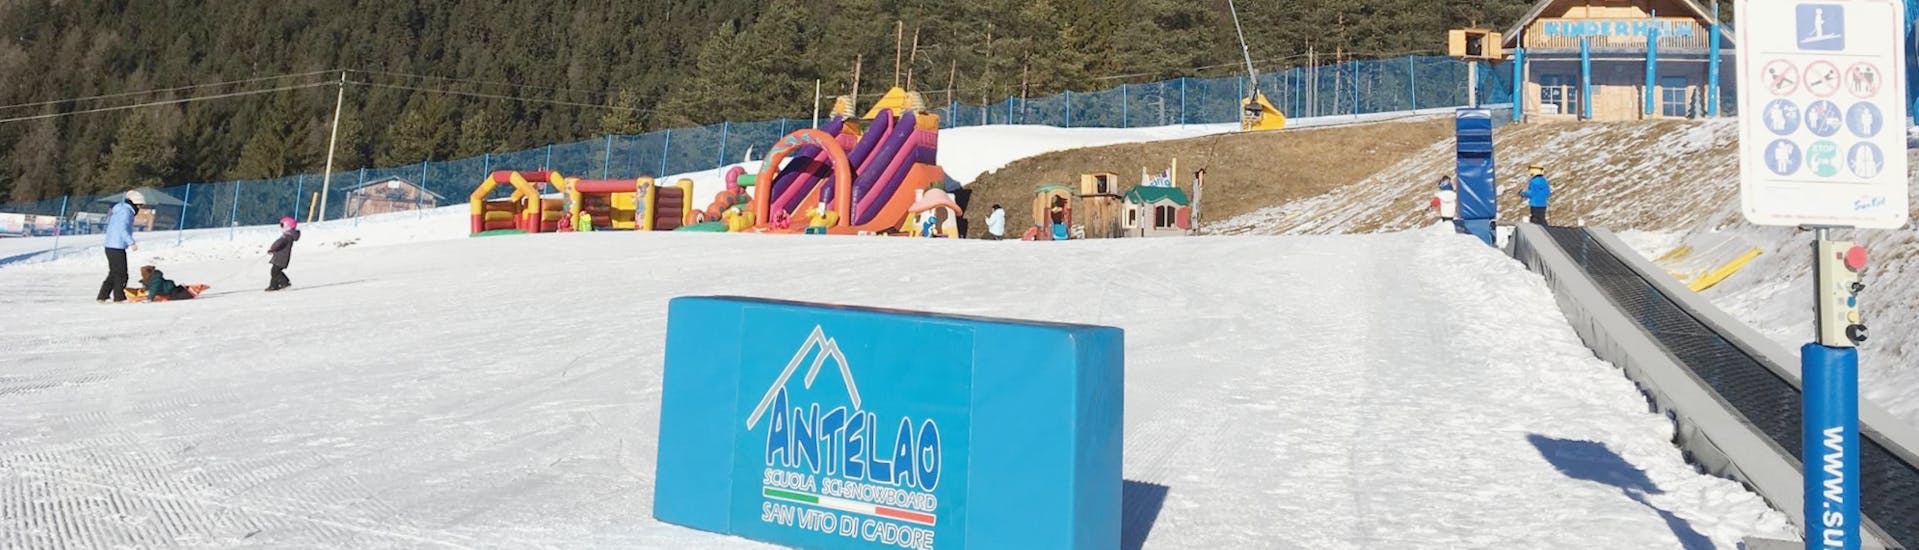 The kids area where the Kids Ski Lessons (4-6 y.) for Beginners with Scuola Sci Antelao San Vito di Cadore take place.